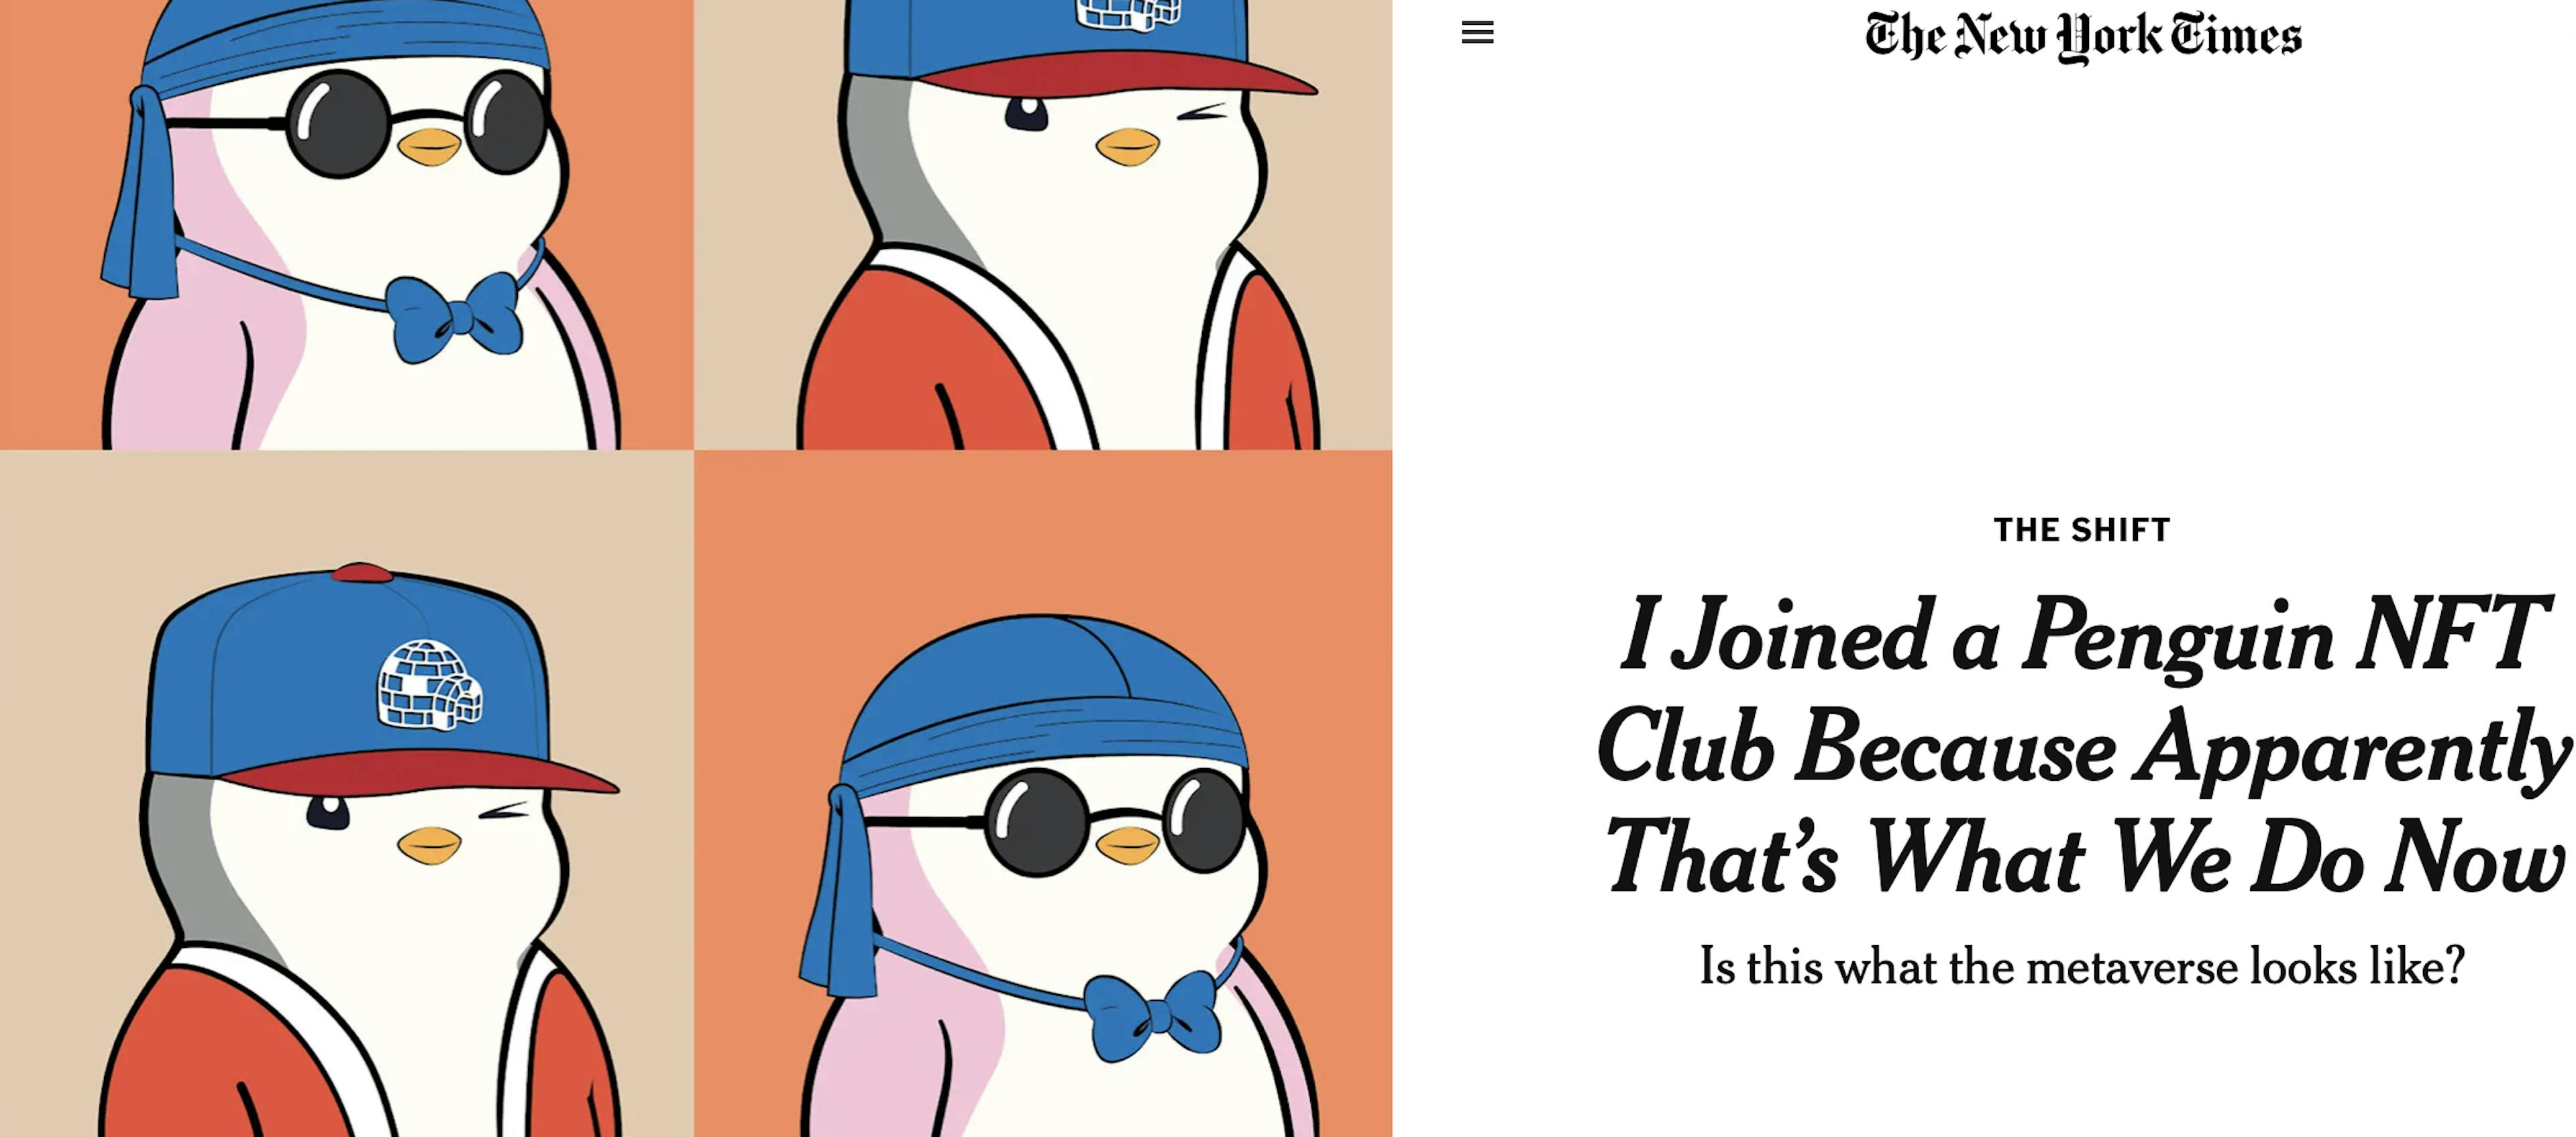 Pudgy Penguins were featured in a New York Times article in August of 2021